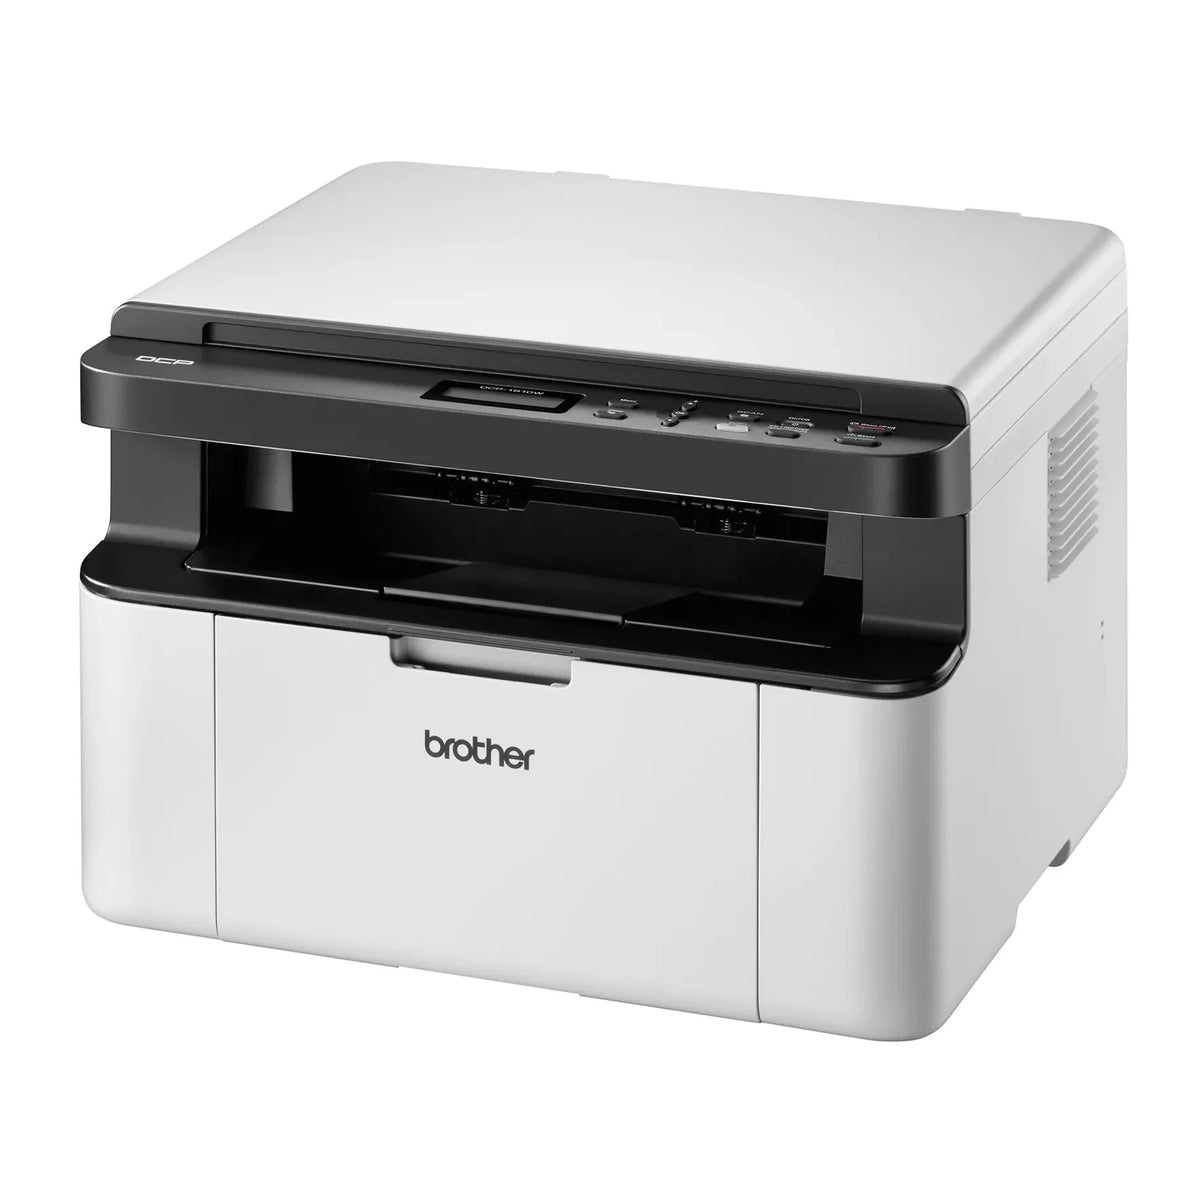 Brother Mono Laser Multifunction Printer - White &amp; Black | DCP1610W from Brother - DID Electrical